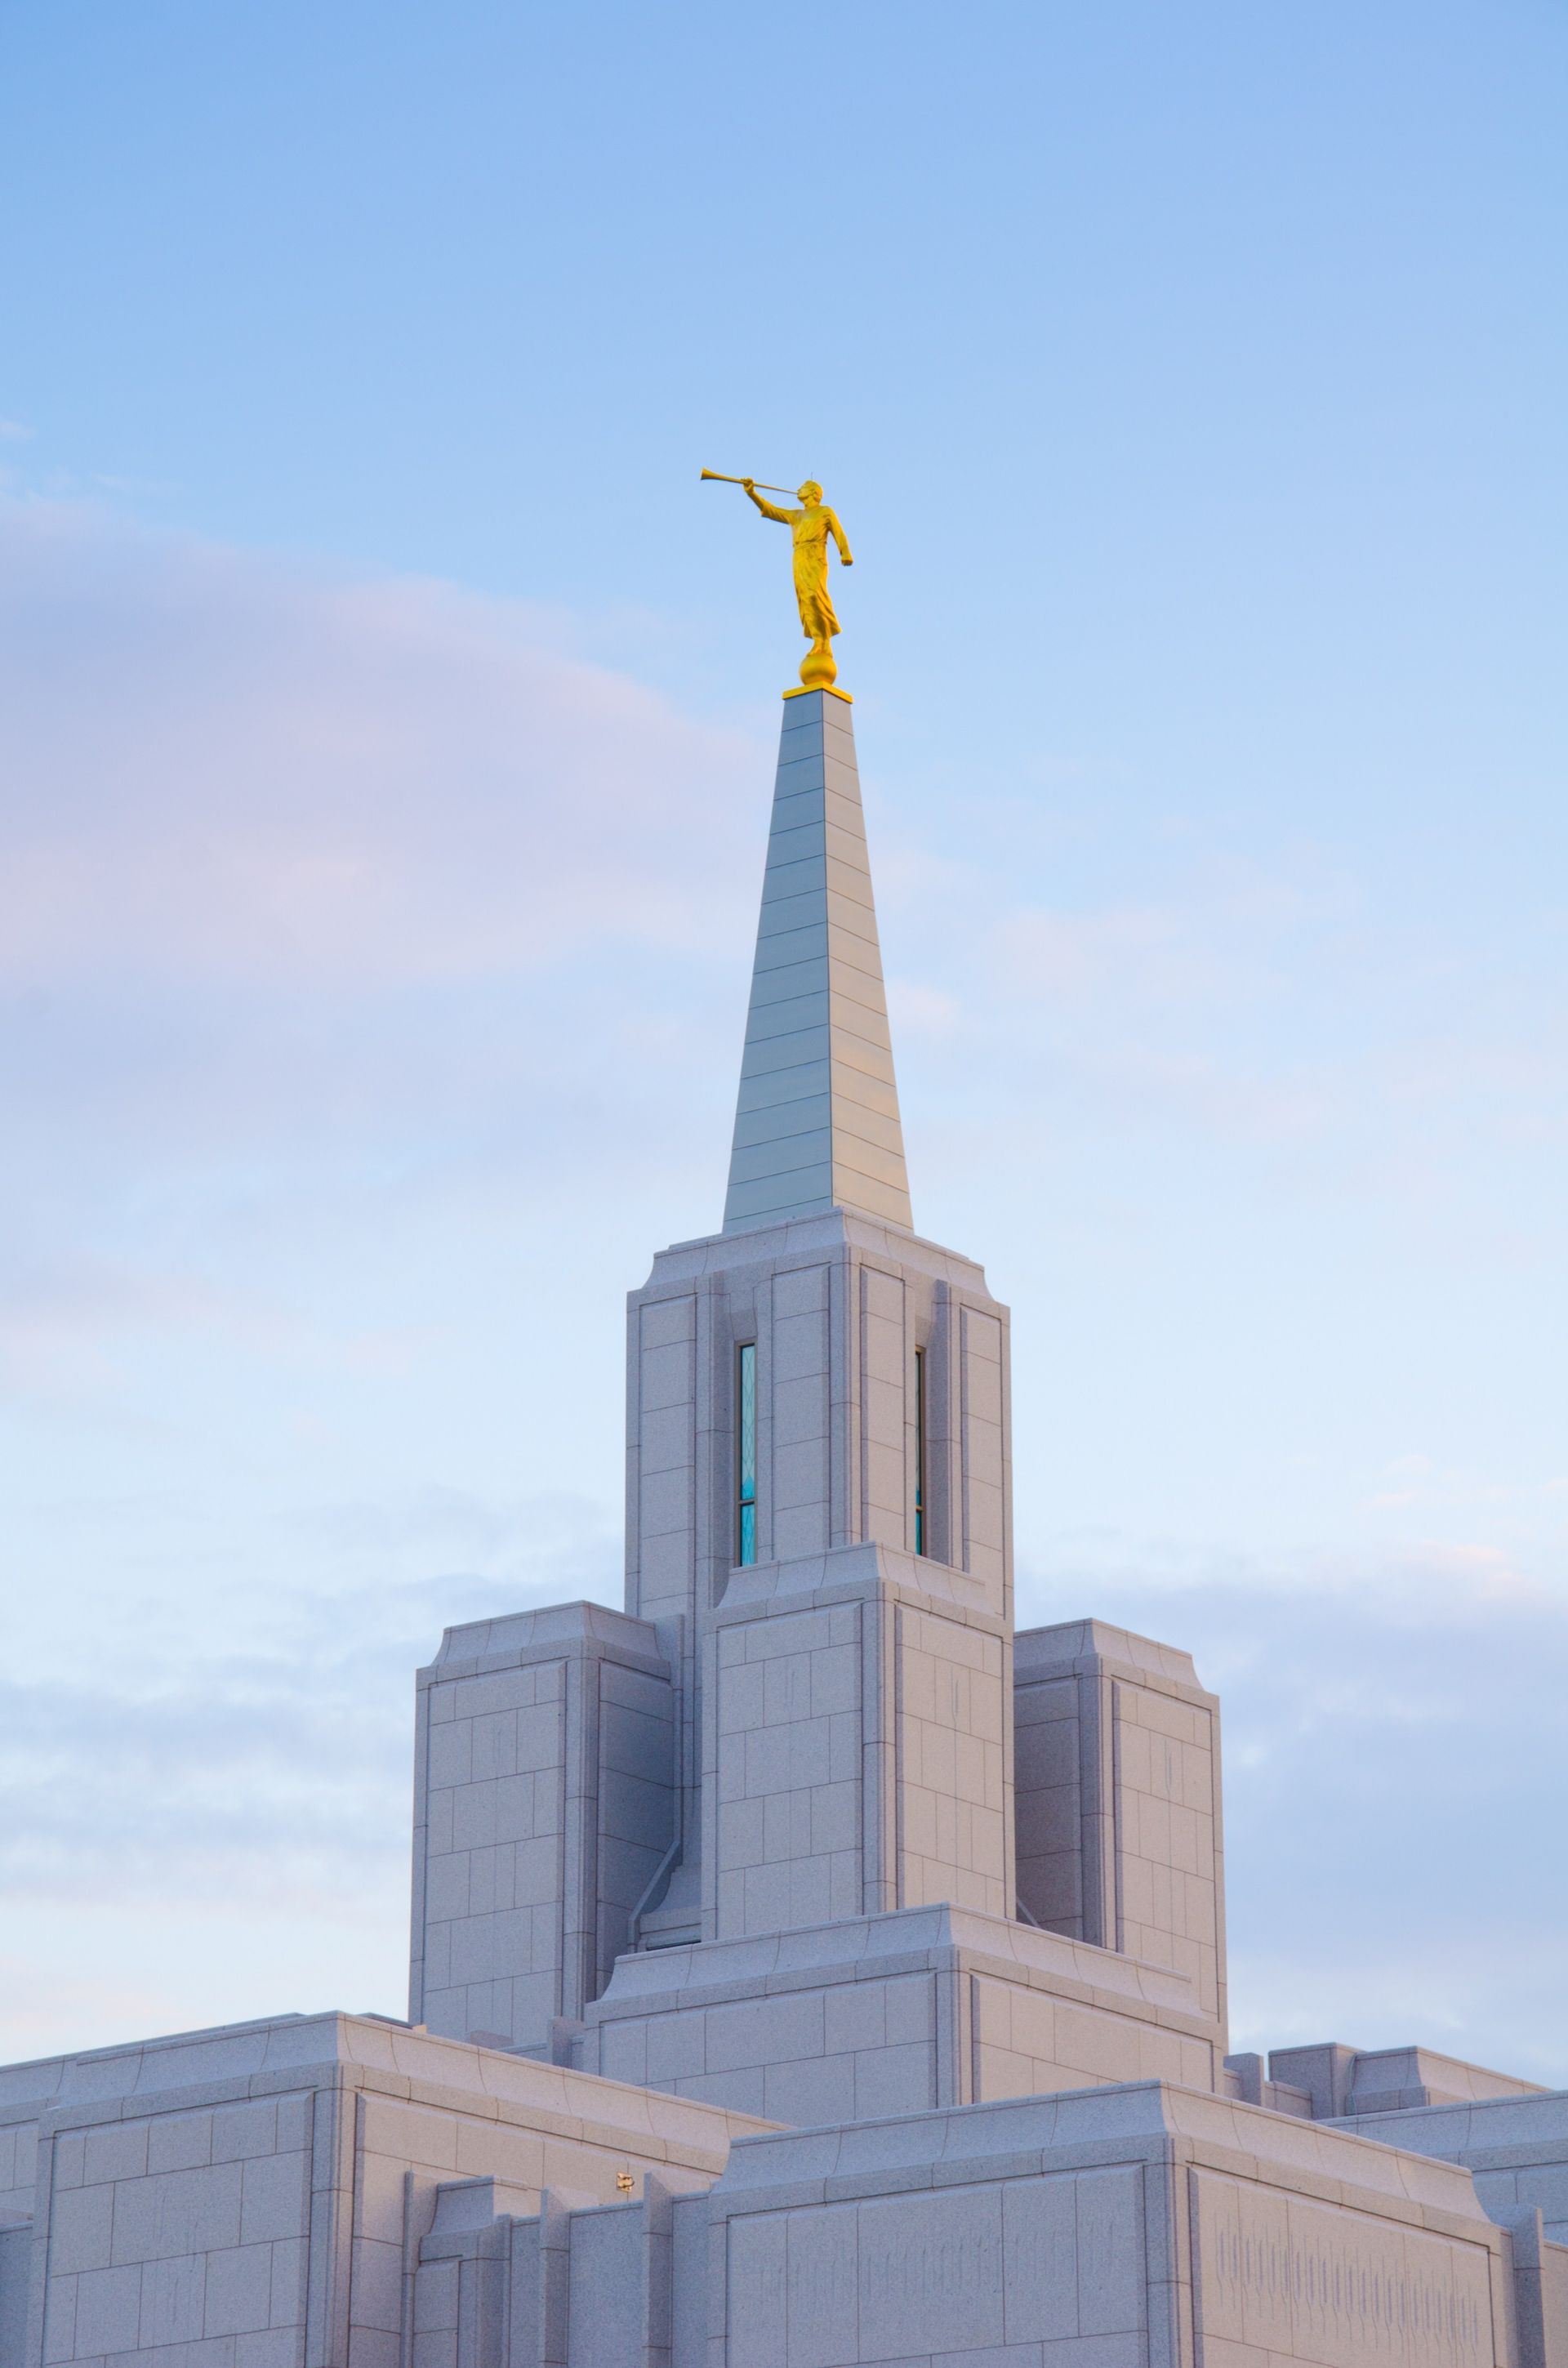 The angel Moroni stands on top of the spire of the Calgary Alberta Temple.